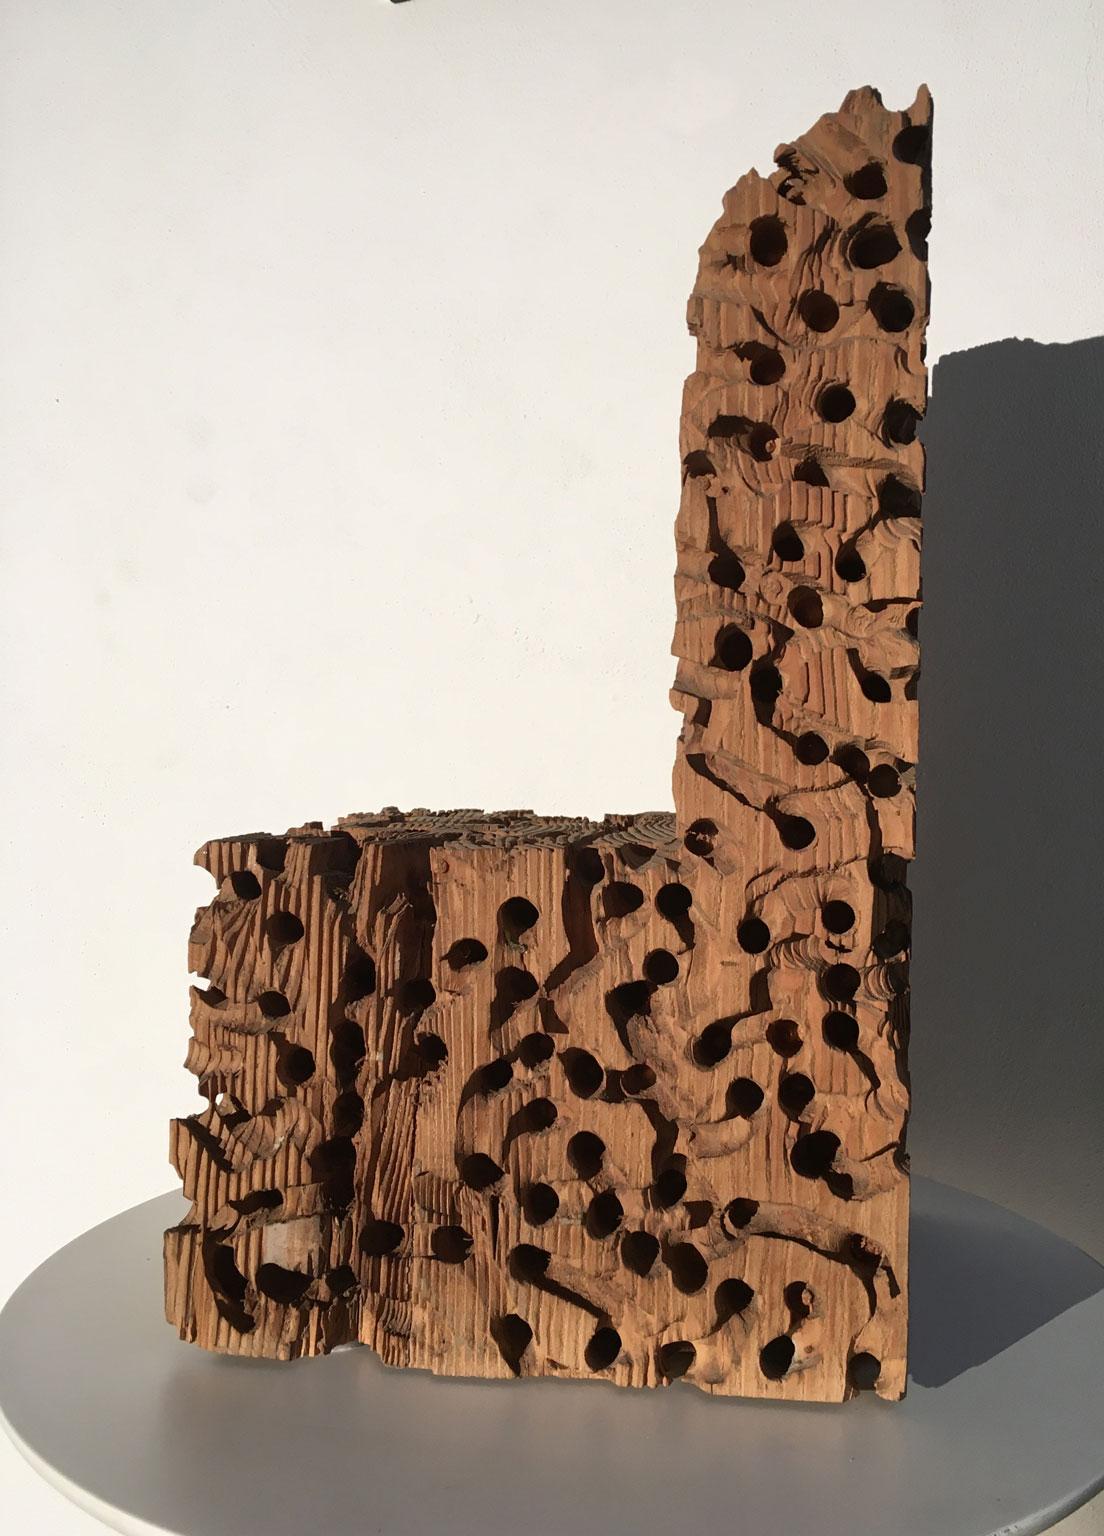 Hand-Carved 1985 Wooden Abstract Sculpture by Urano Palma Sedia The Chairs For Sale